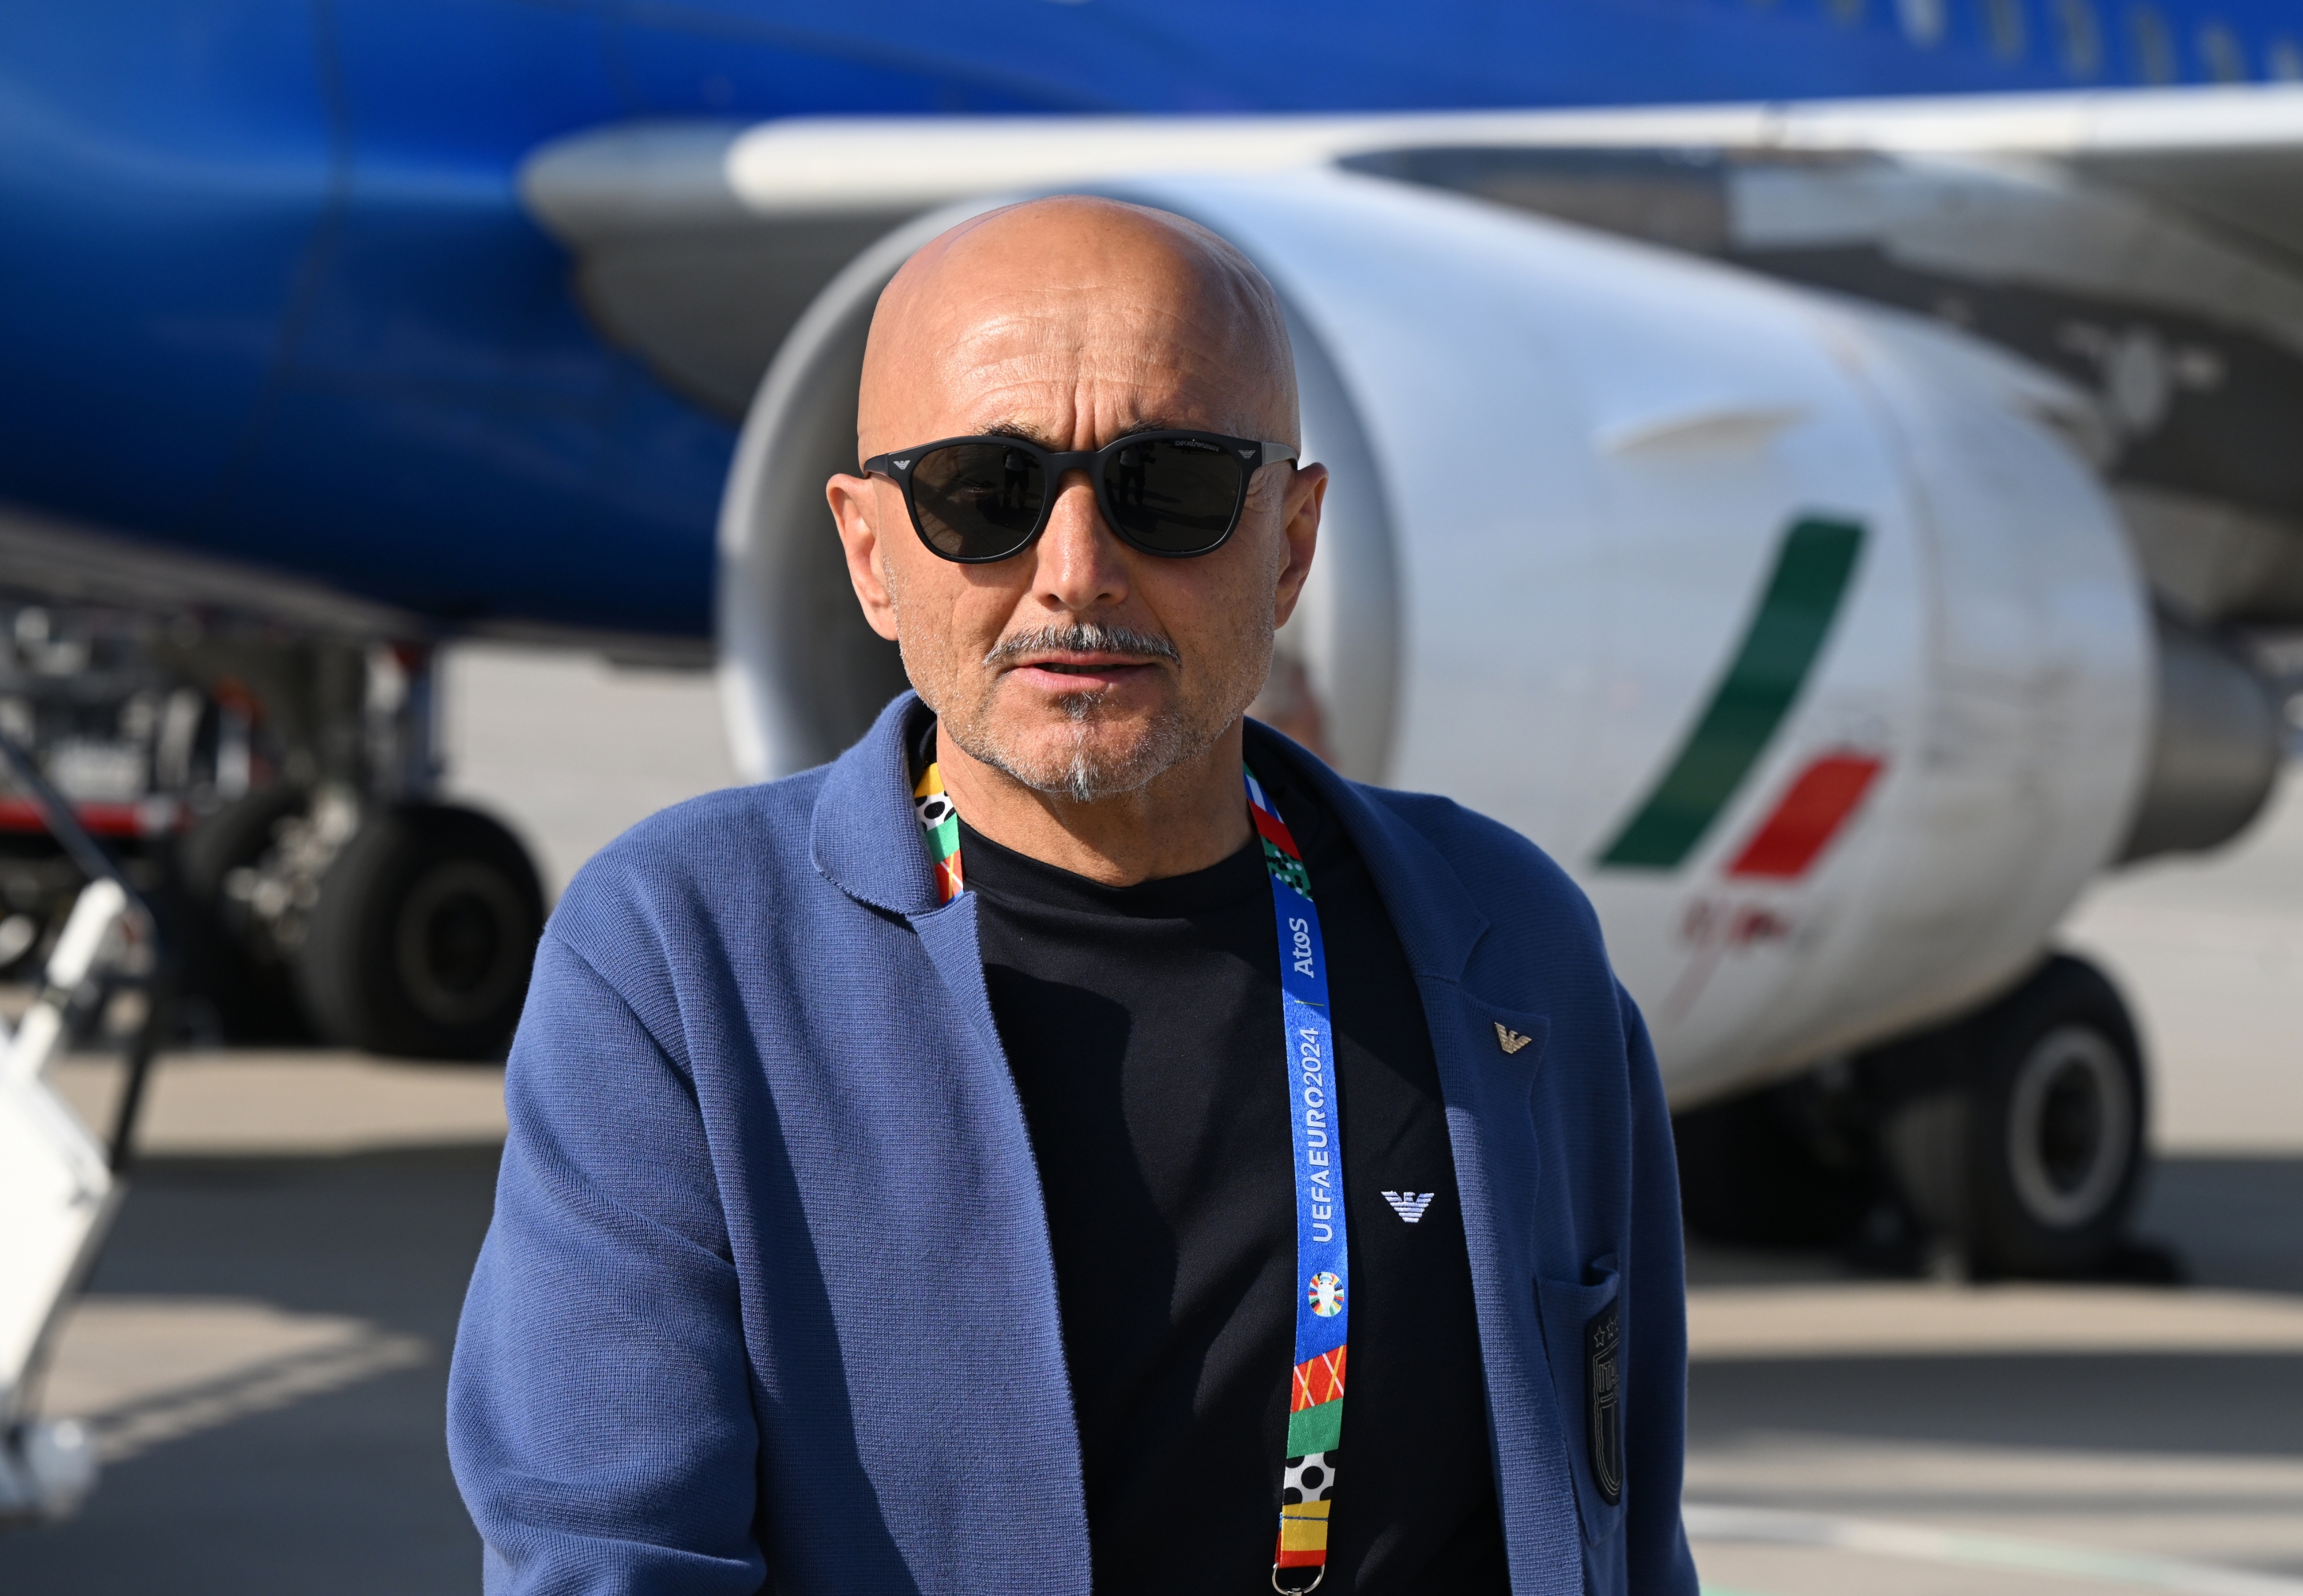 BERLIN, GERMANY - JUNE 28:  Head coach of Italy Luciano Spalletti  looks on upon arrival ahead of the Italy training session at Olympiastadion on June 28, 2024 in Berlin, Germany. (Photo by Claudio Villa/Getty Images for FIGC)